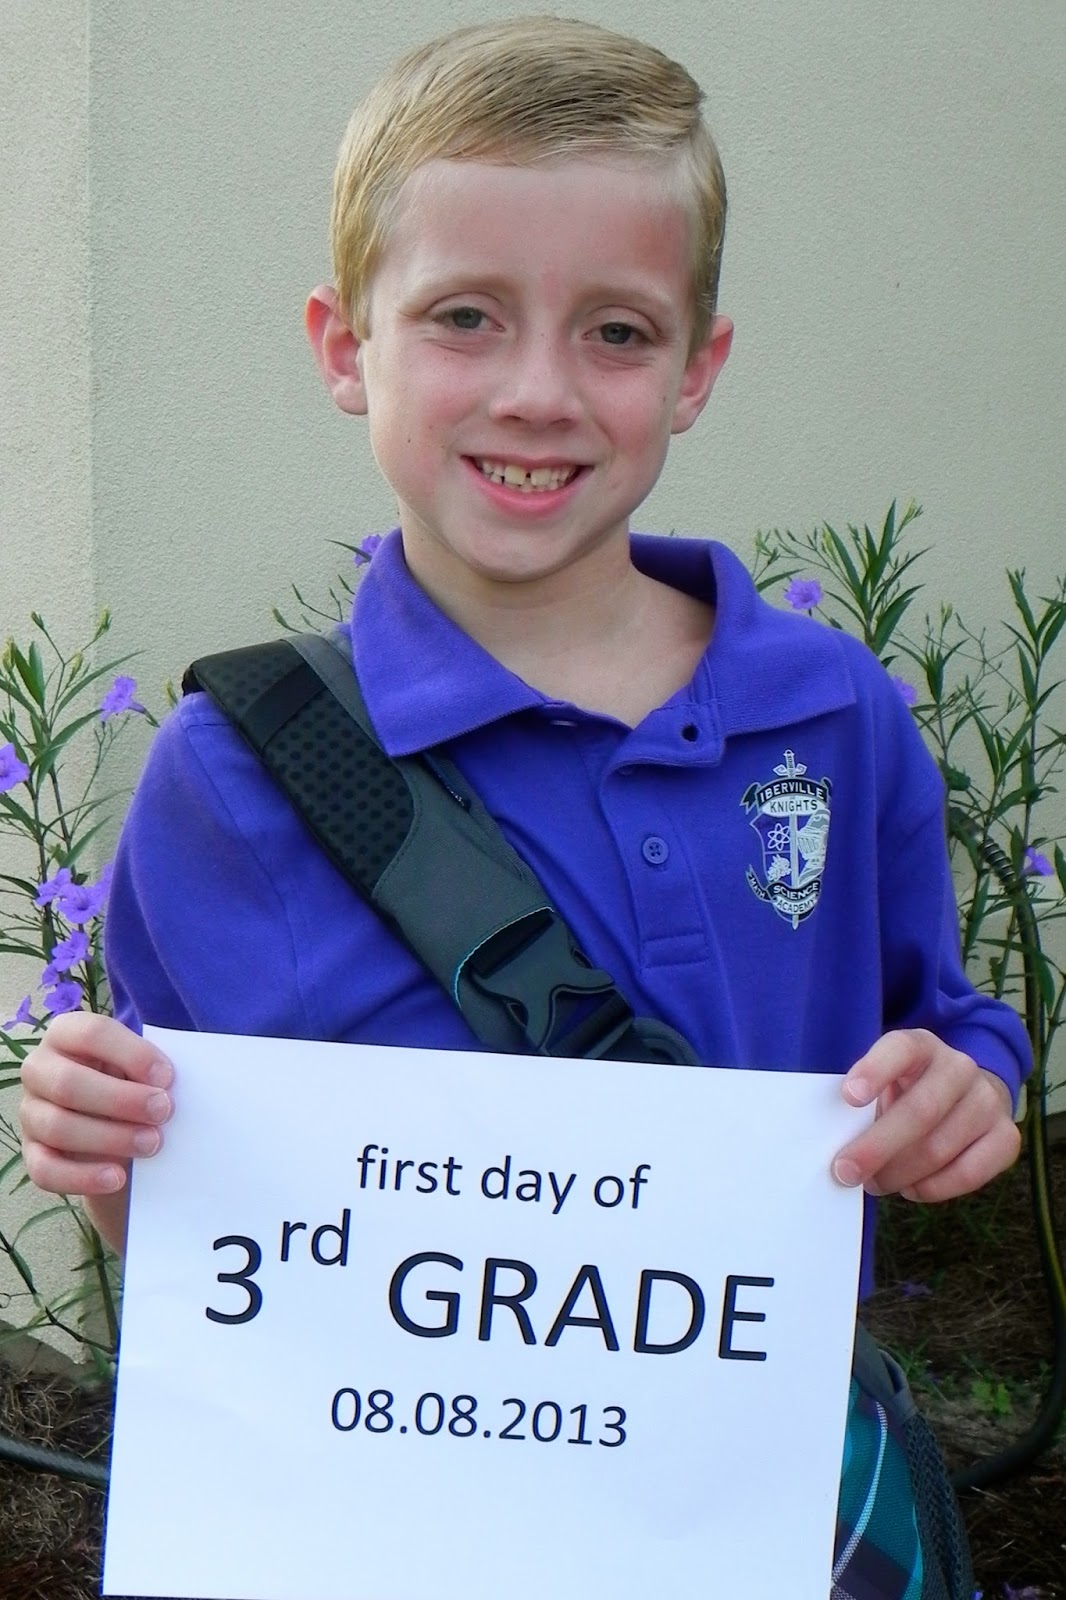 the-first-day-of-3rd-grade-printable-poster-is-displayed-in-front-of-a